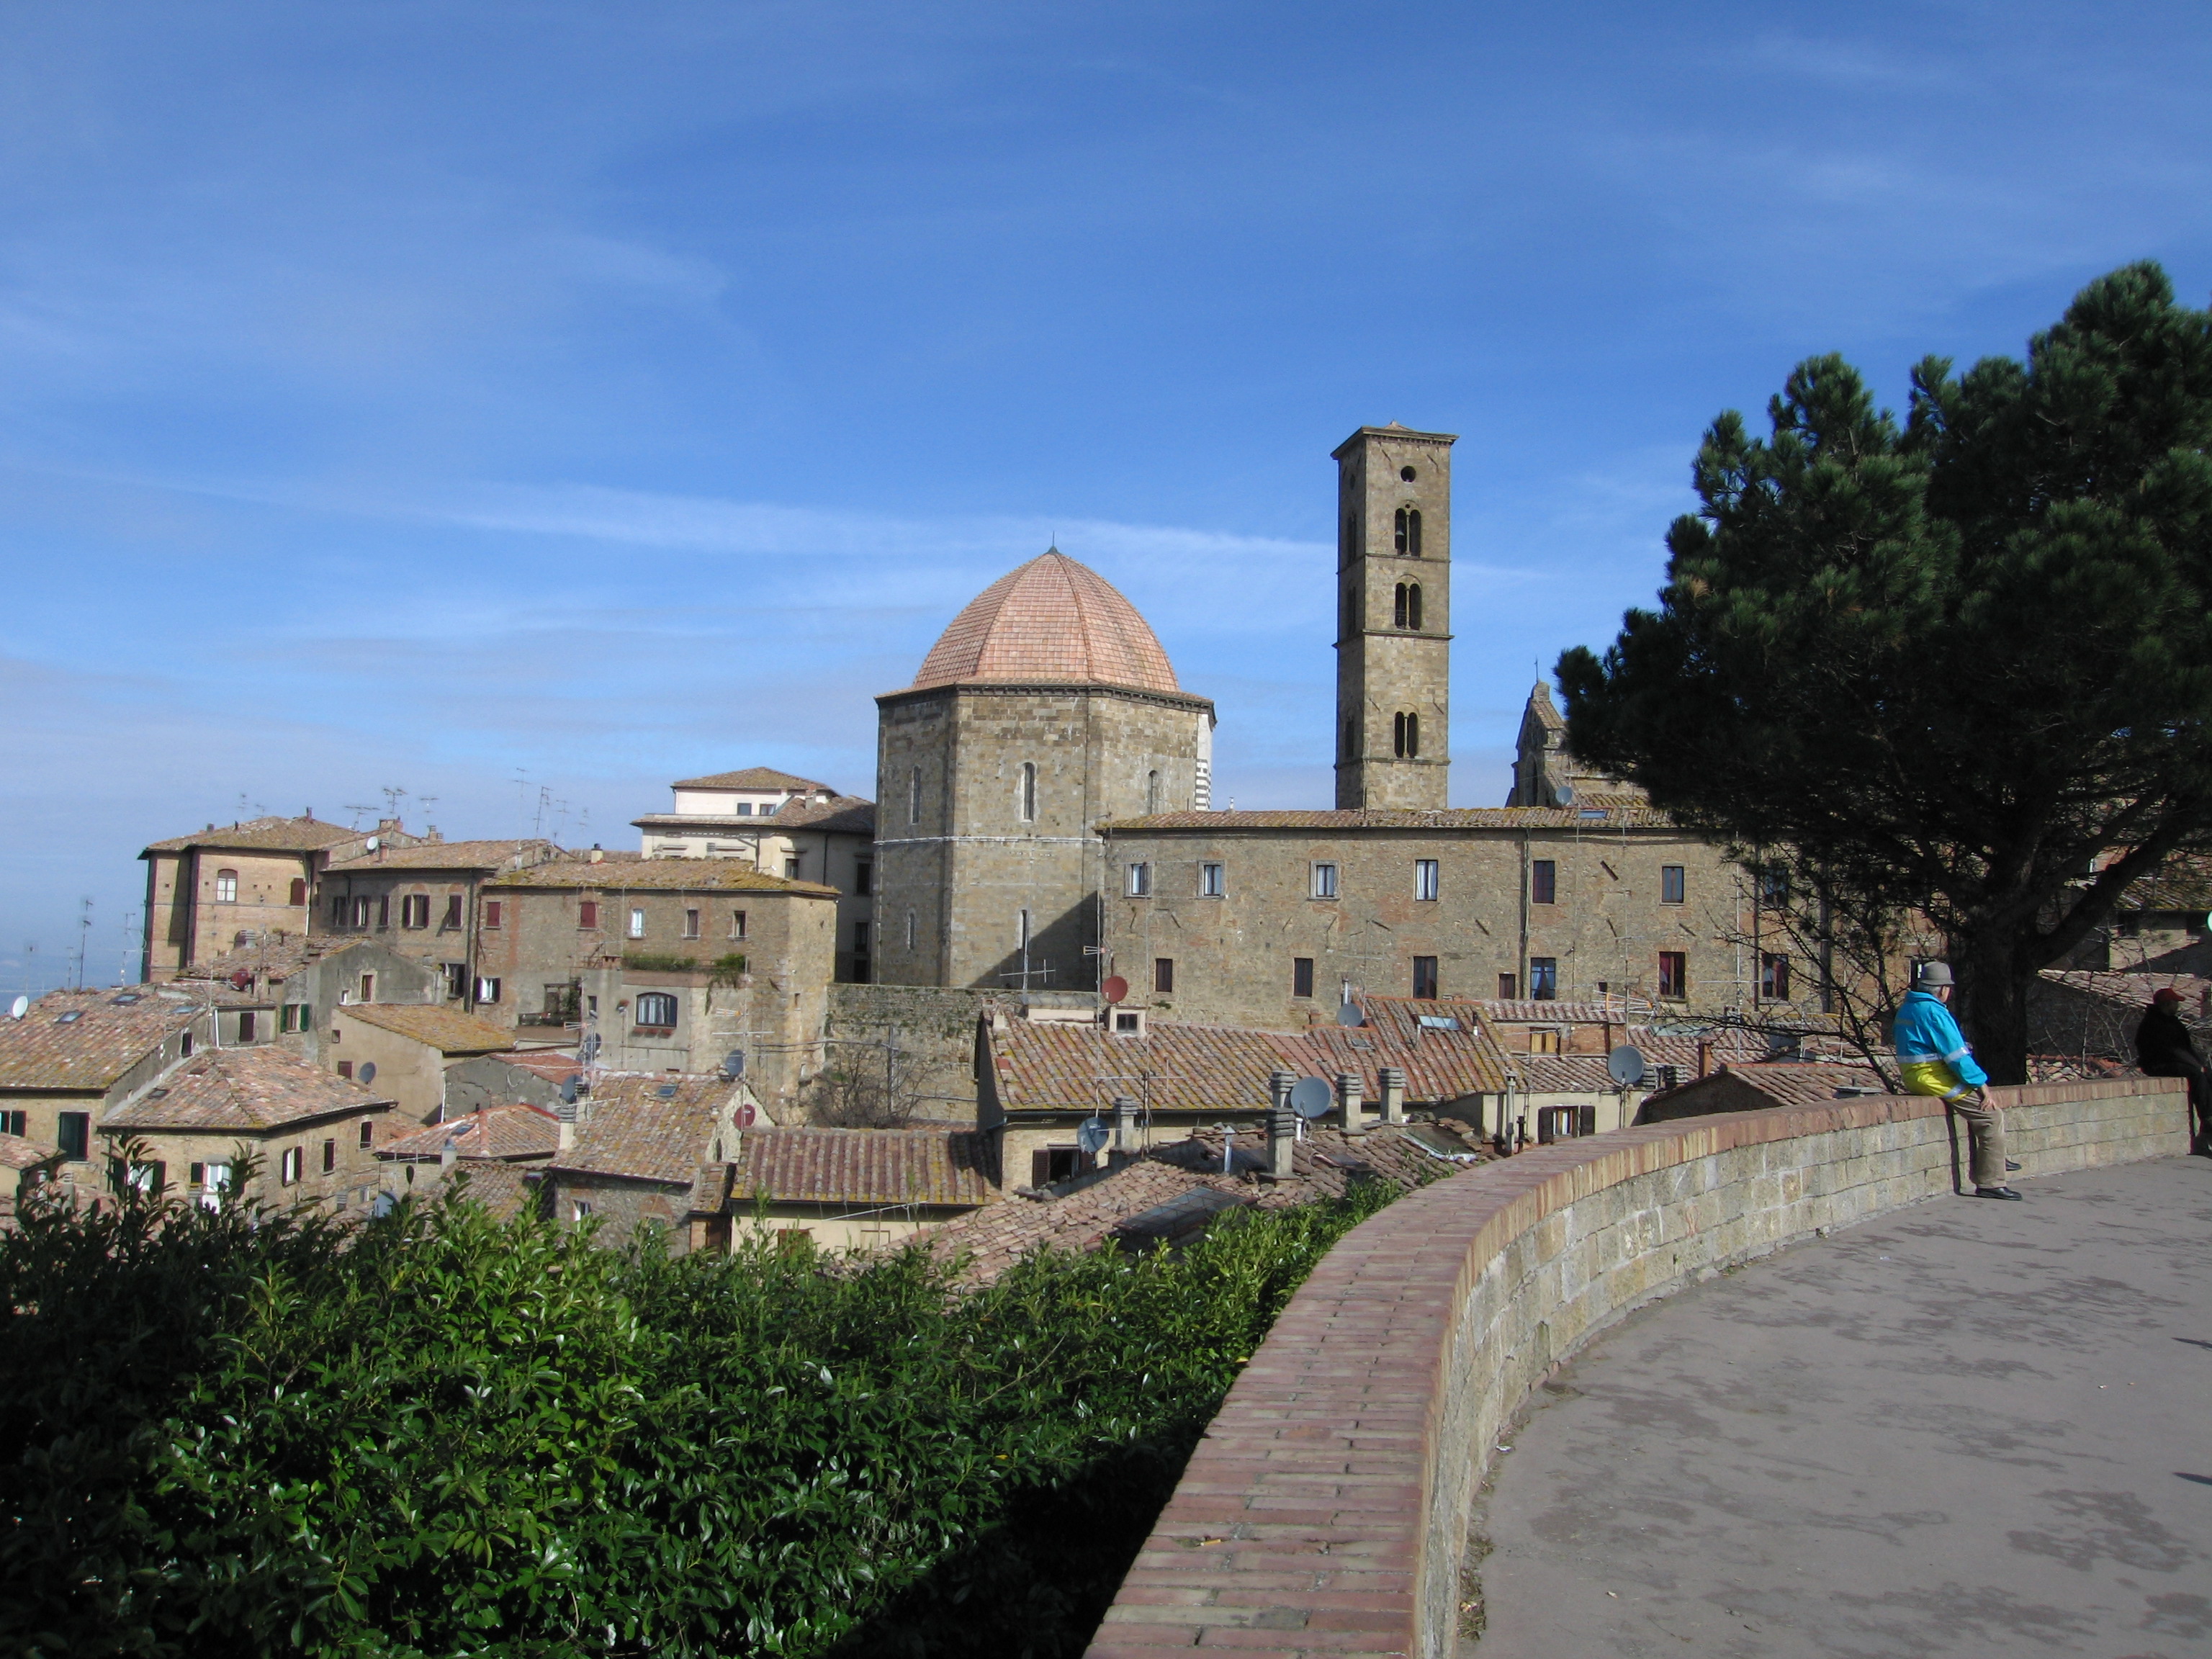 Travel Talk Tuesday: August 31, 2021 – Volterra – Vineyards, Wine and Great Dining